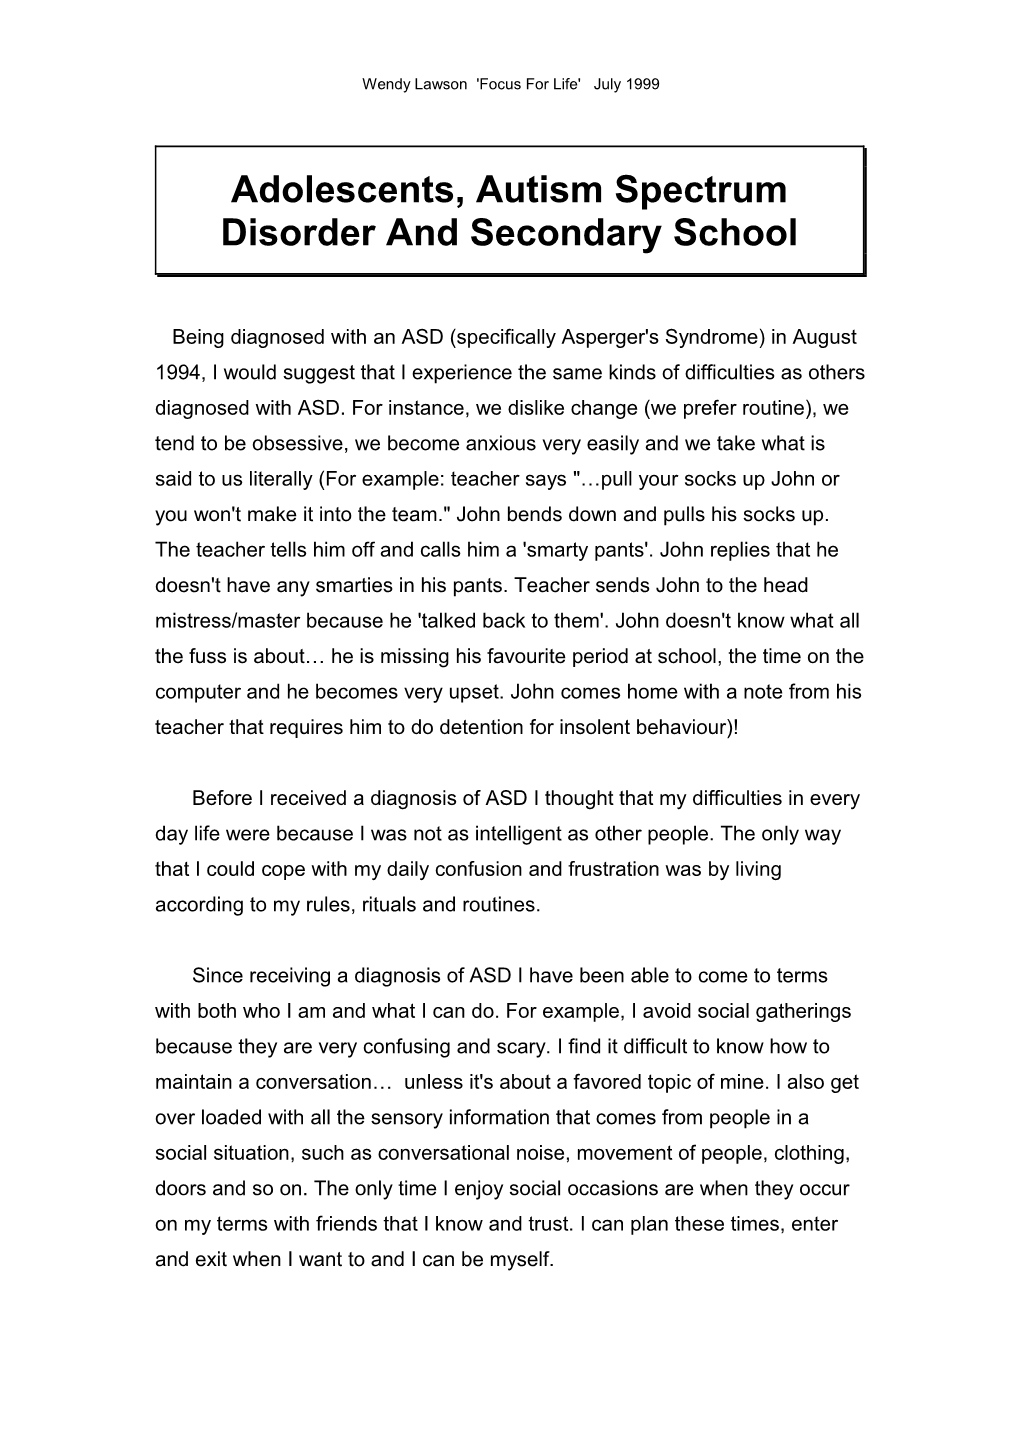 Adolescents, Asperger's Syndrome and School